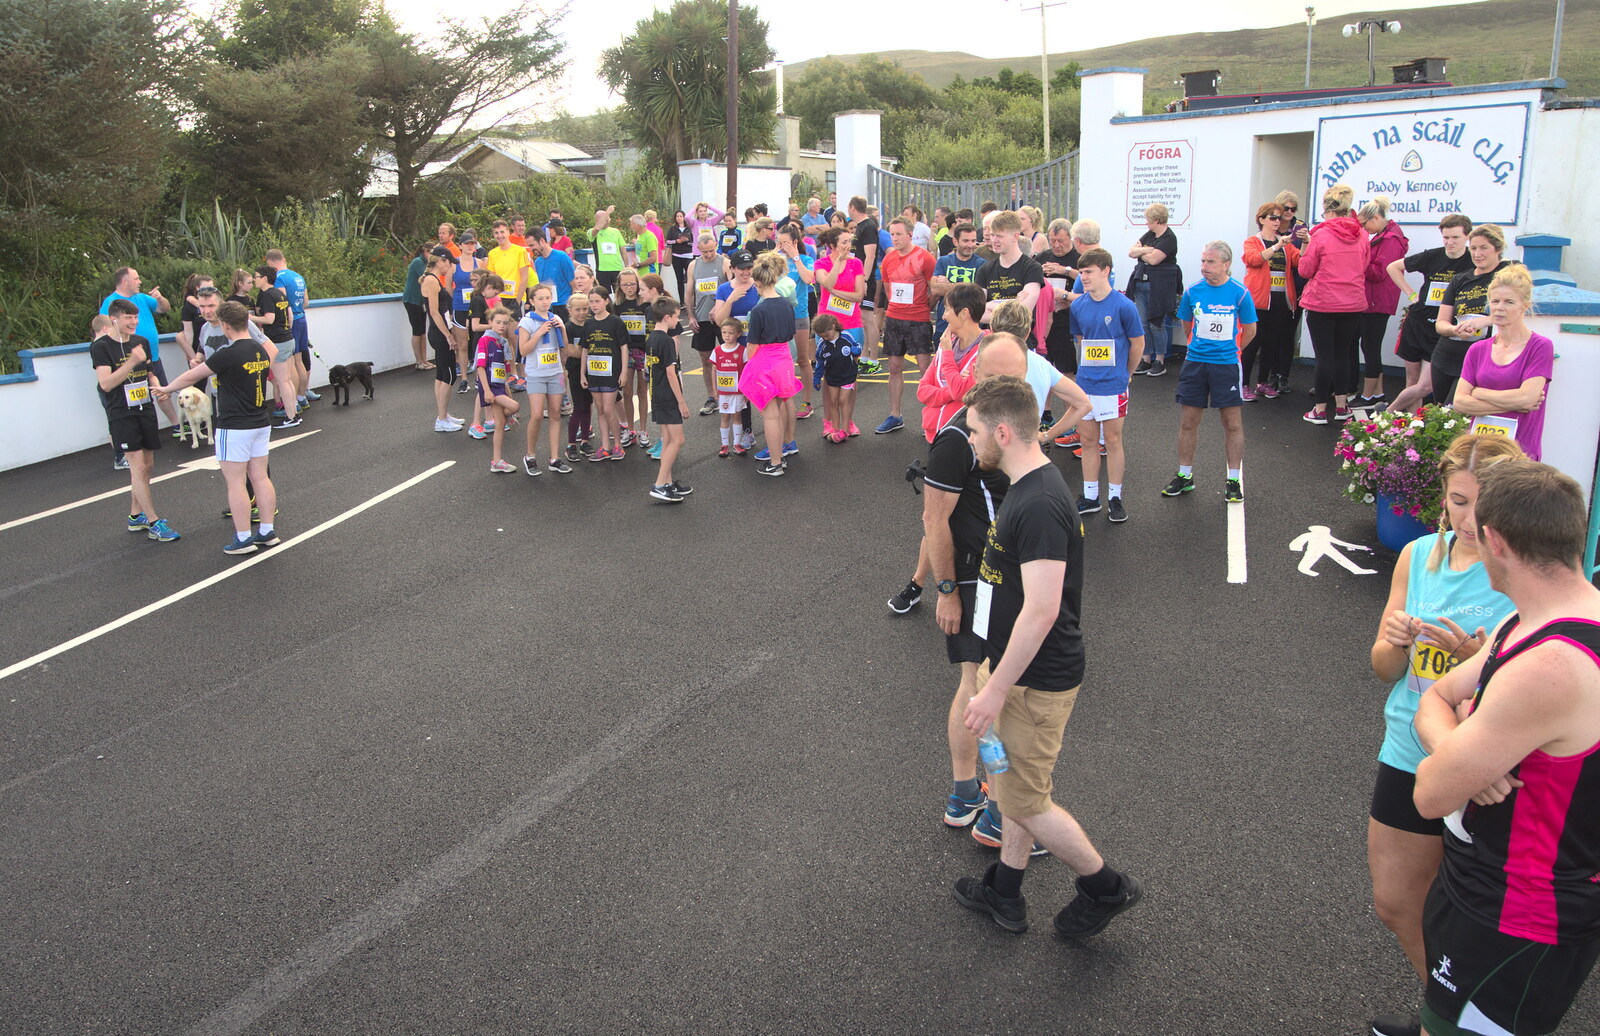 Runners gather at the starting line from The Annascaul 10k Run, Abha na Scáil, Kerry, Ireland - 5th August 2017